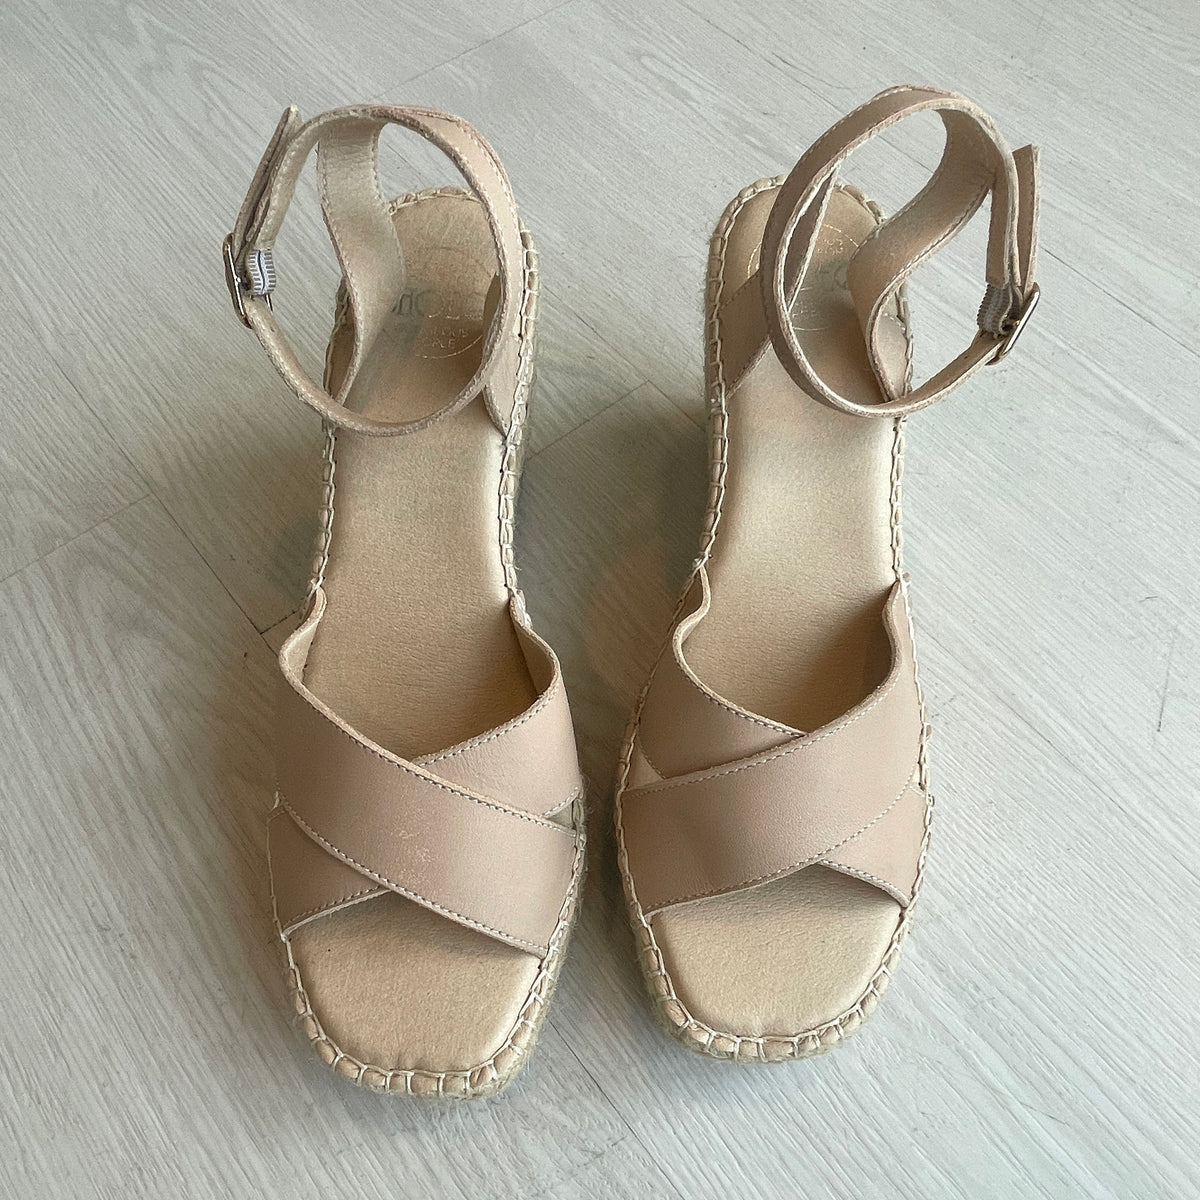 Lucia Espadrille Wedge in Sand - Outlet item - Size 40